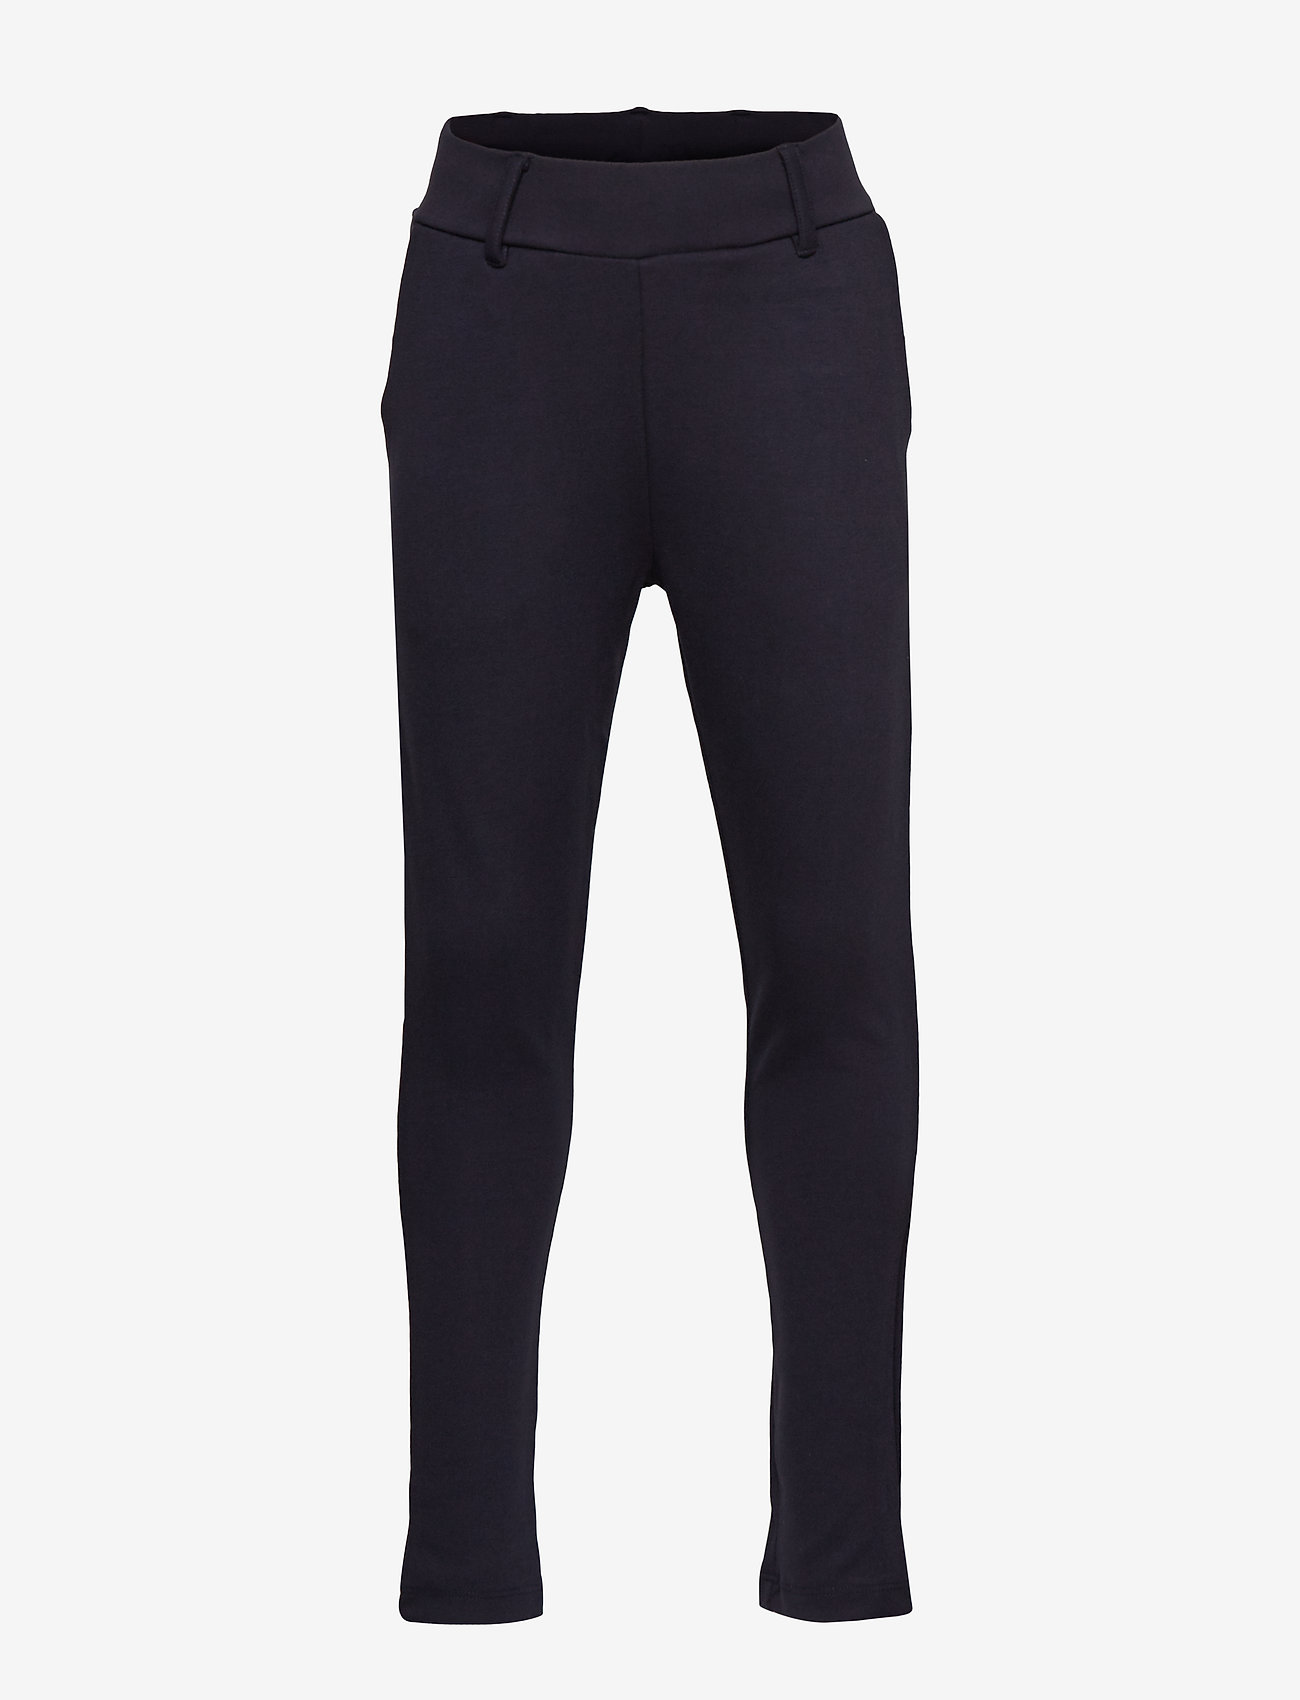 The New Emily Pants - Trousers | Boozt.com